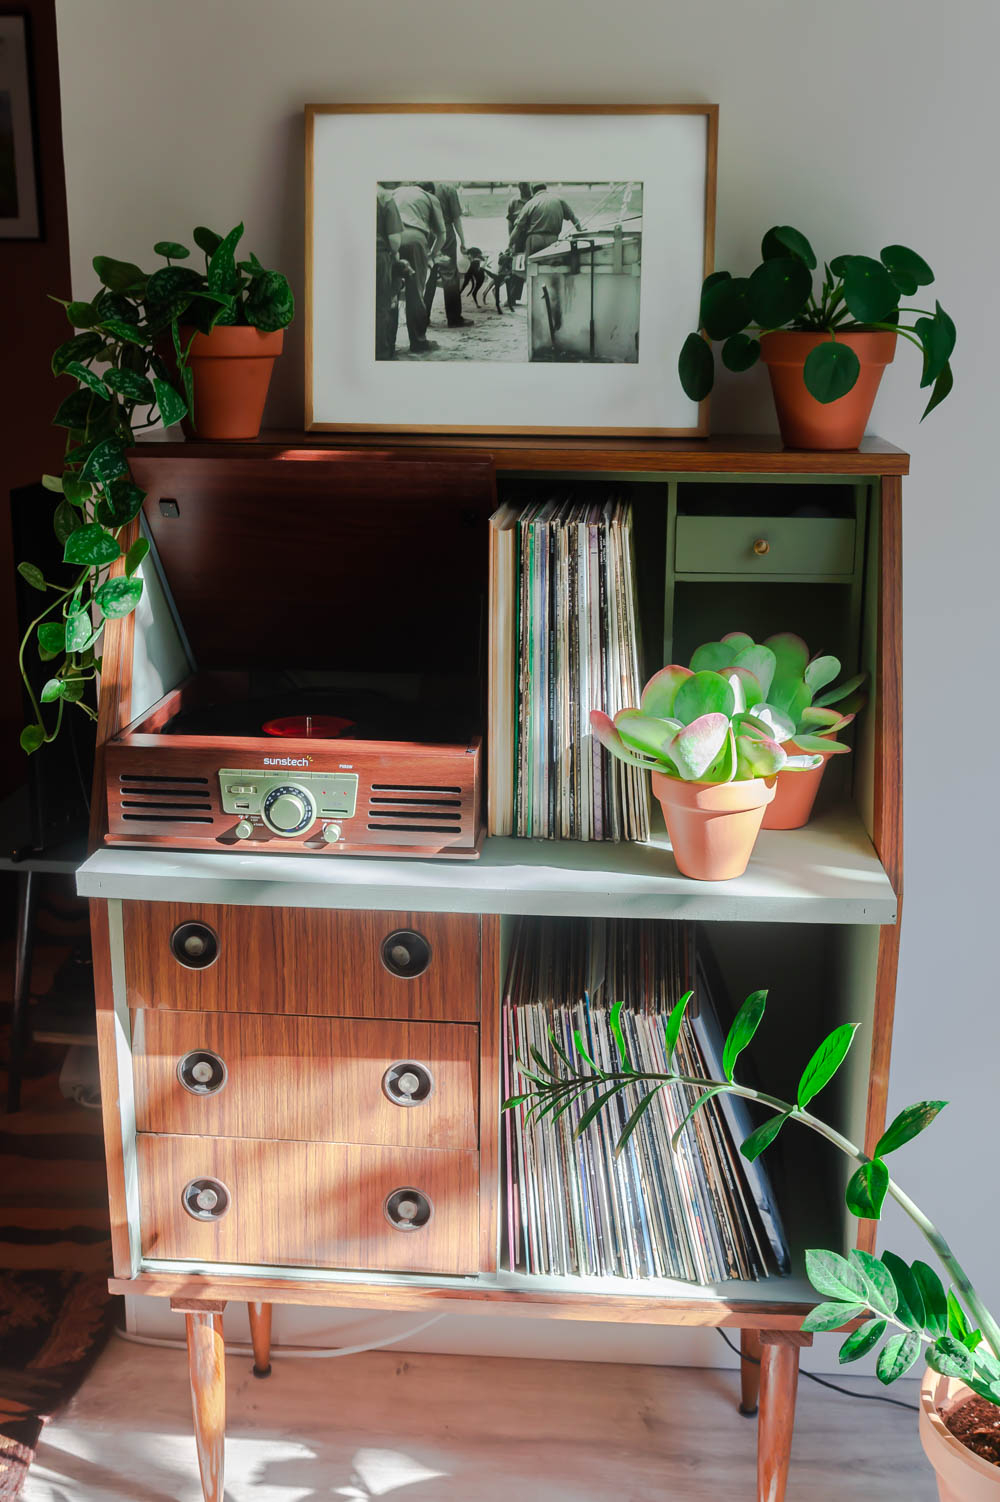 Barcelona home tour: vintage record player cabinet